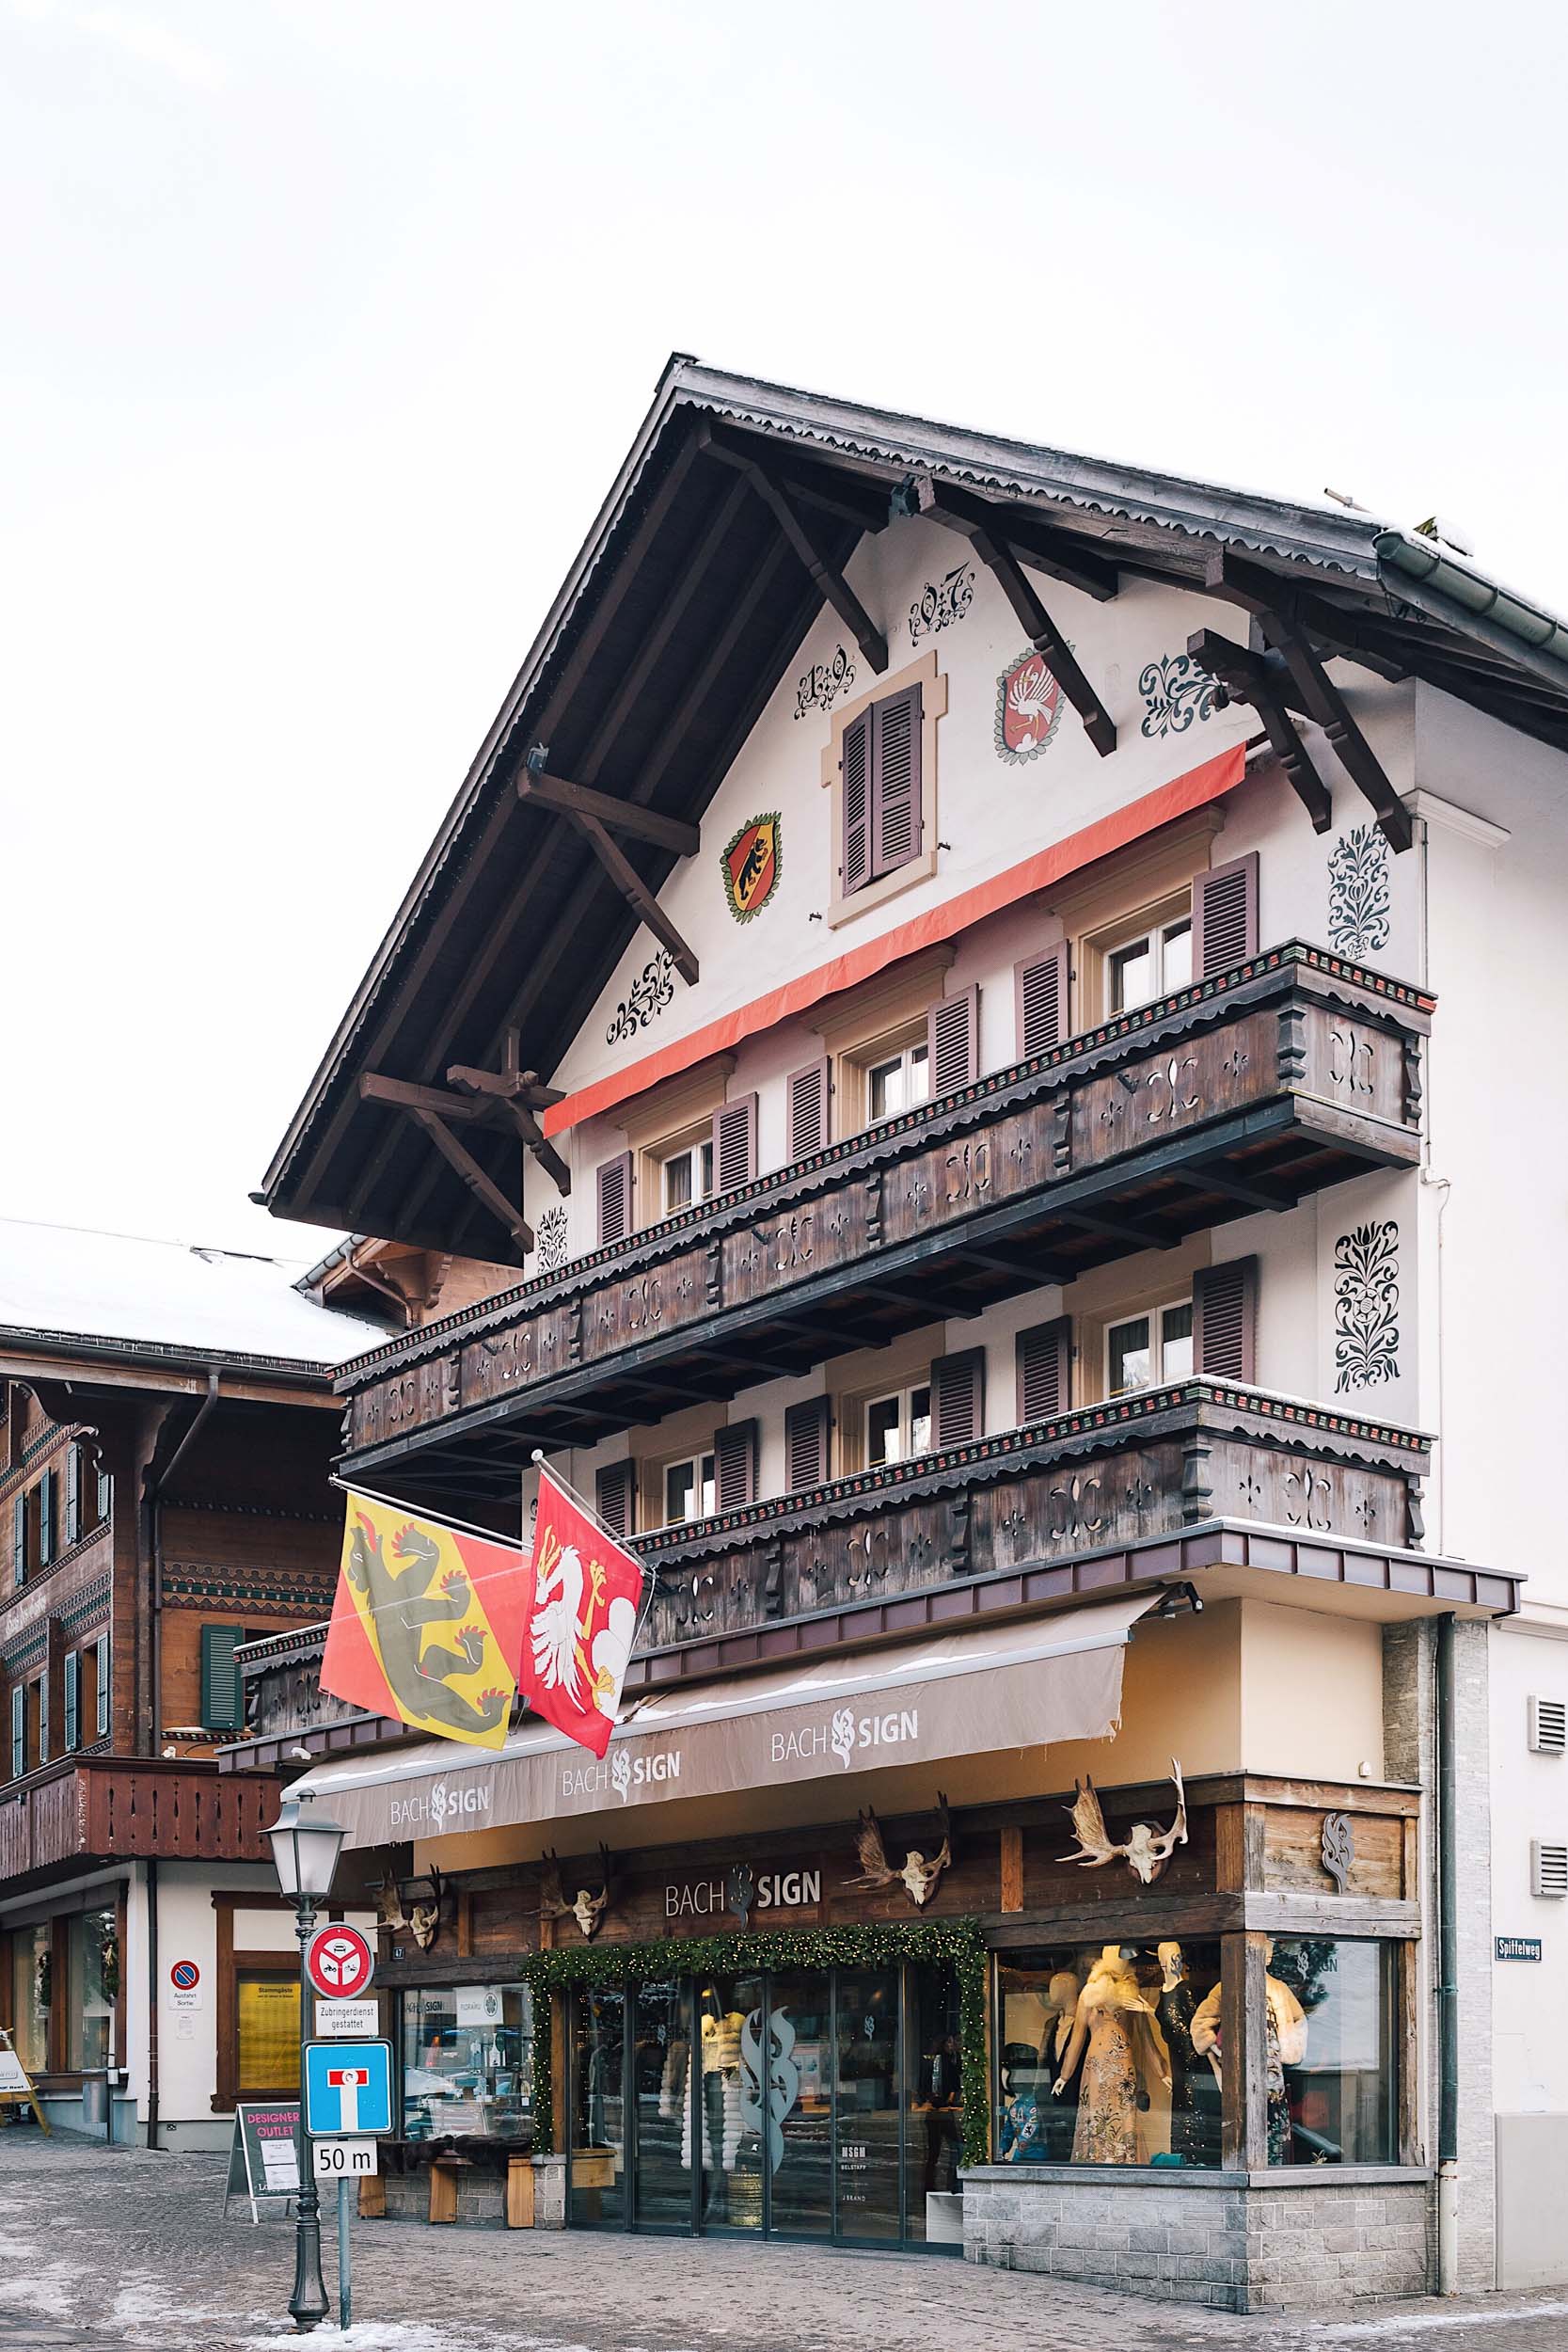 Gstaad, Switzerland is a popular destination for many, including a handful of famous celebrities like Julie Andrews, Salma Hayek, Valentino, and Elizabeth Taylor.